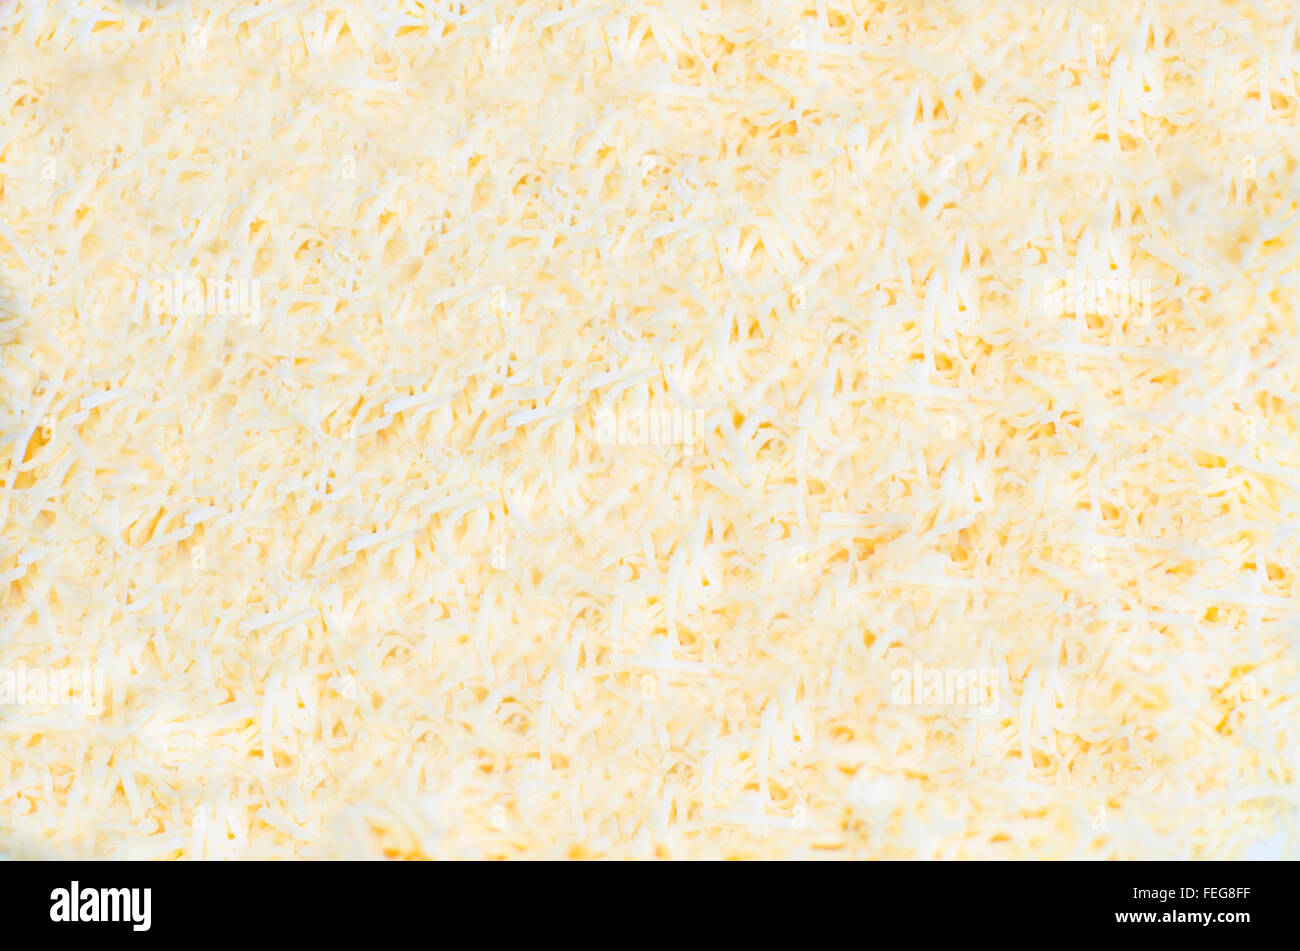 background cheese,light from a natural product,grated,background,texture,product,cheese,small,crumb,beige color Stock Photo